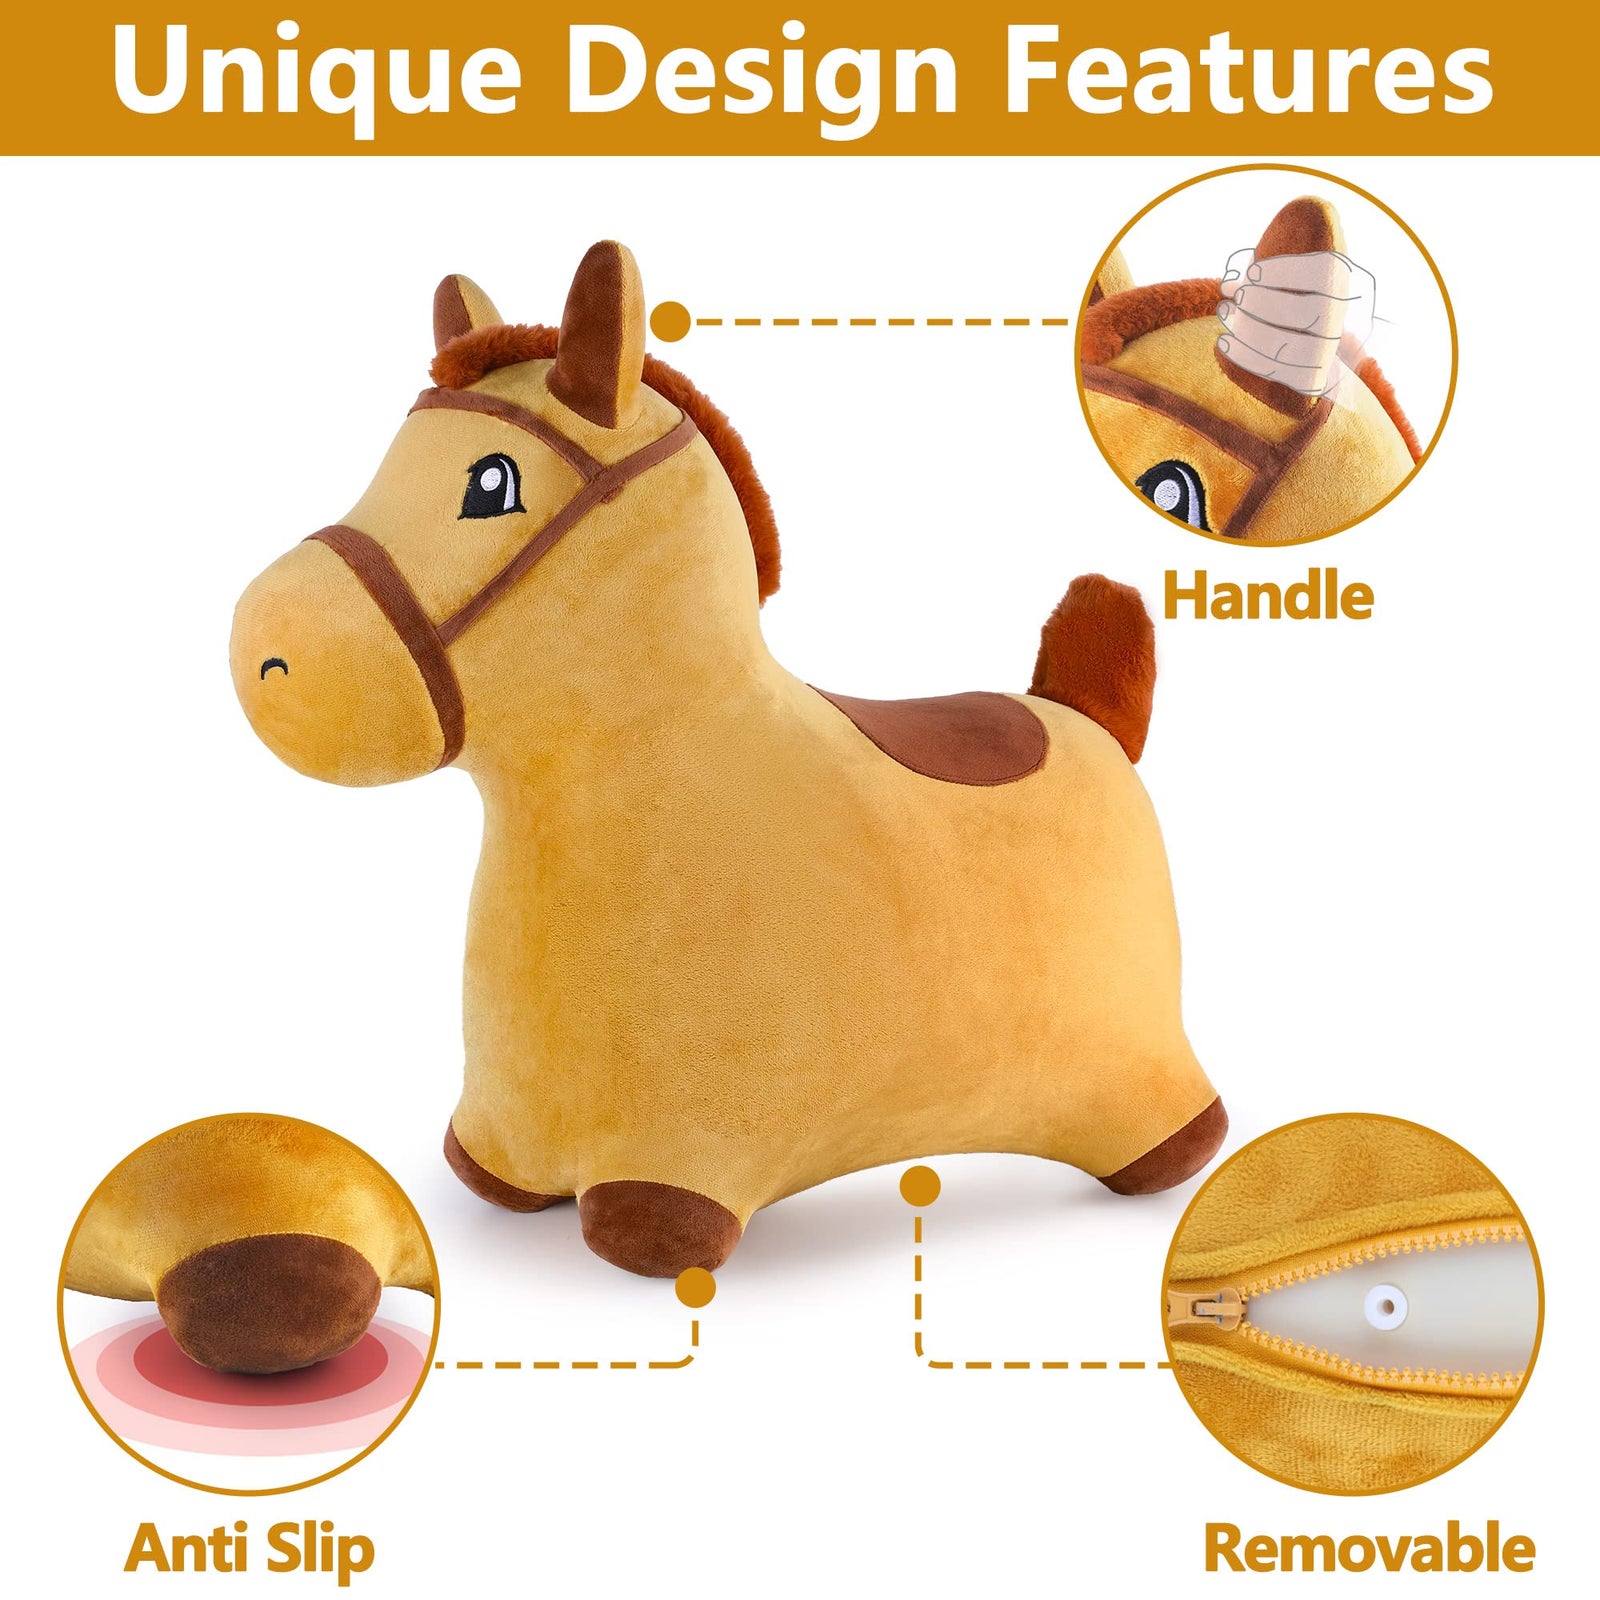 iPlay, iLearn Bouncy Pals Yellow Hopping Horse, Outdoor Ride on Bouncy Animal Play Toys, Inflatable Hopper Plush Covered W/ Pump, Activitie Gift for 18 Months 2 3 4 5 Year Old Kids Toddlers Boys Girls